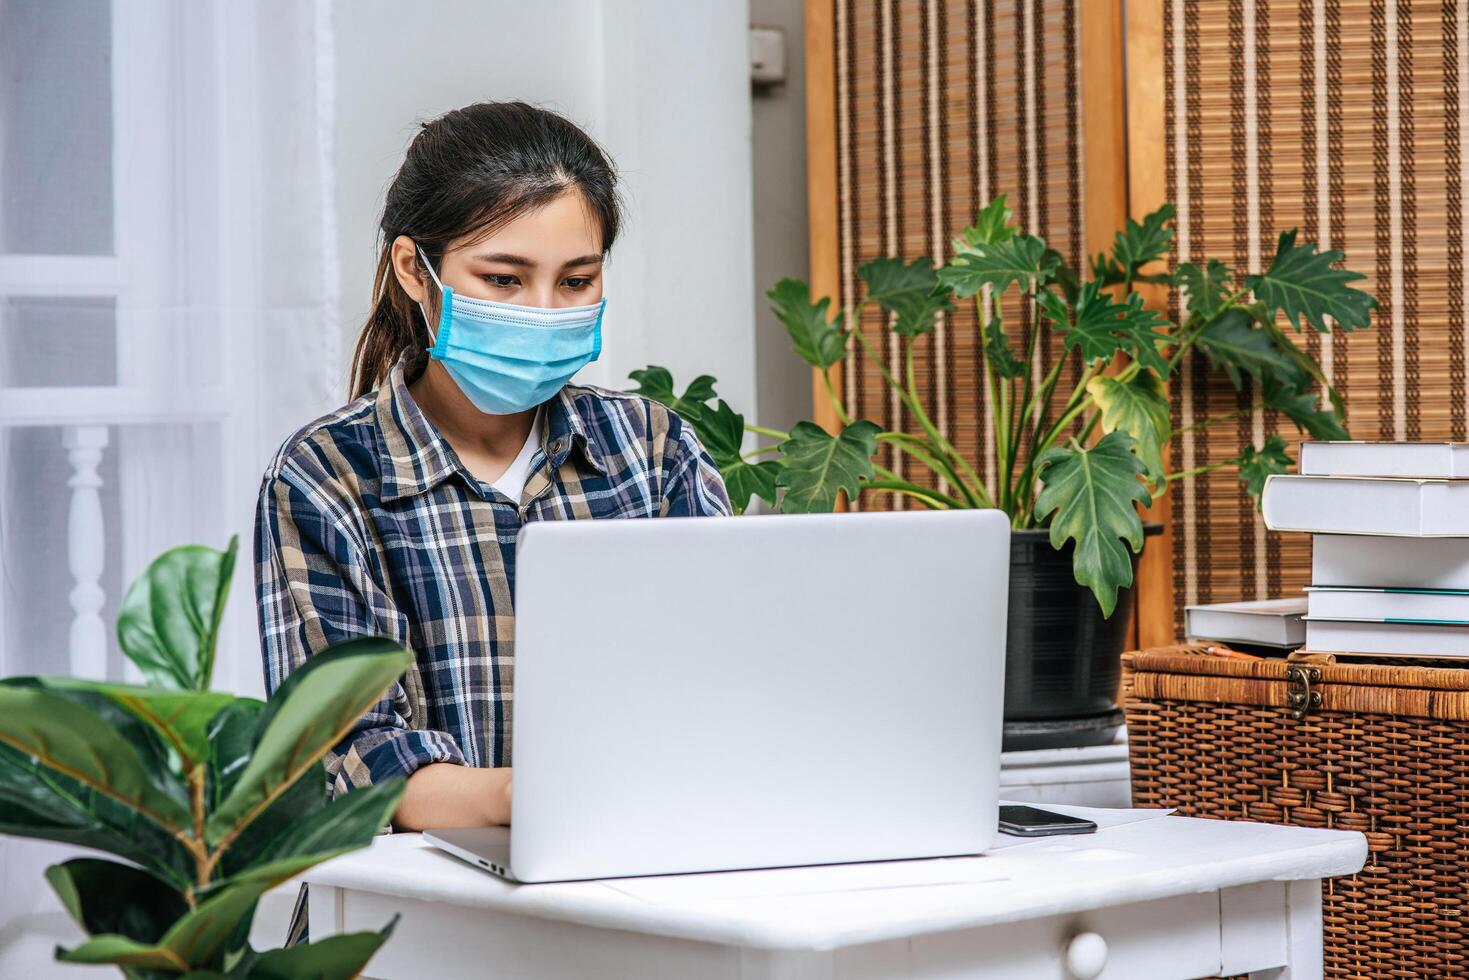 A woman wearing a mask uses a laptop to work. photo